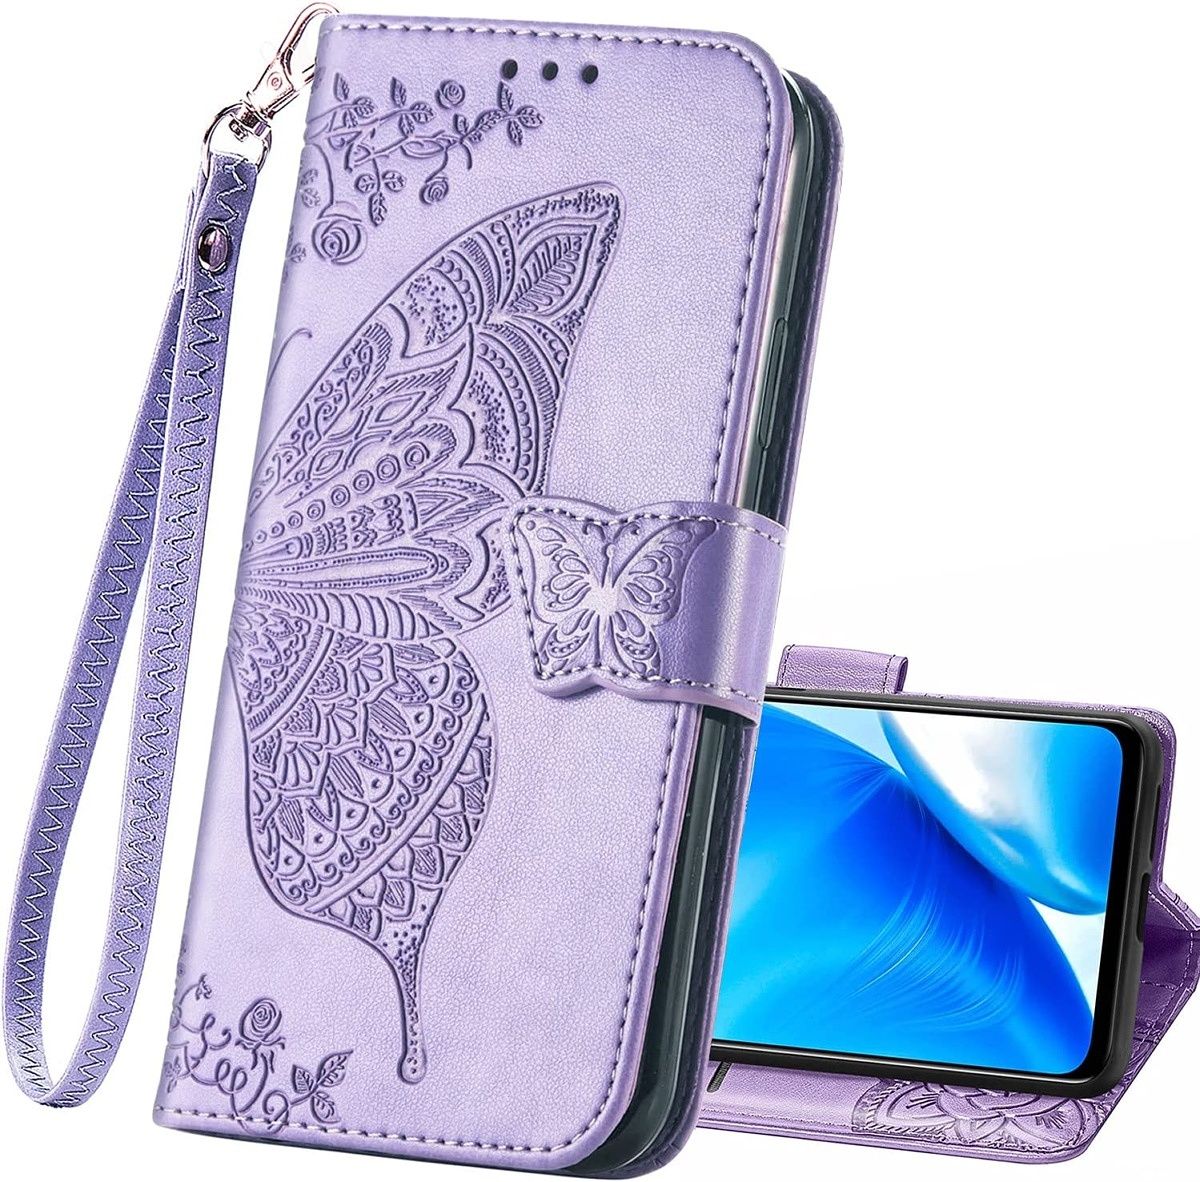 This stylish wallet case is handcrafted from high-qualtiy faux leather and features a butterfly flower design. It has a detachable strap, kickstand function, and three card slots. The case is available in multiple colors, including Lavender, Pink, Purple, Rose Gold, and Black.